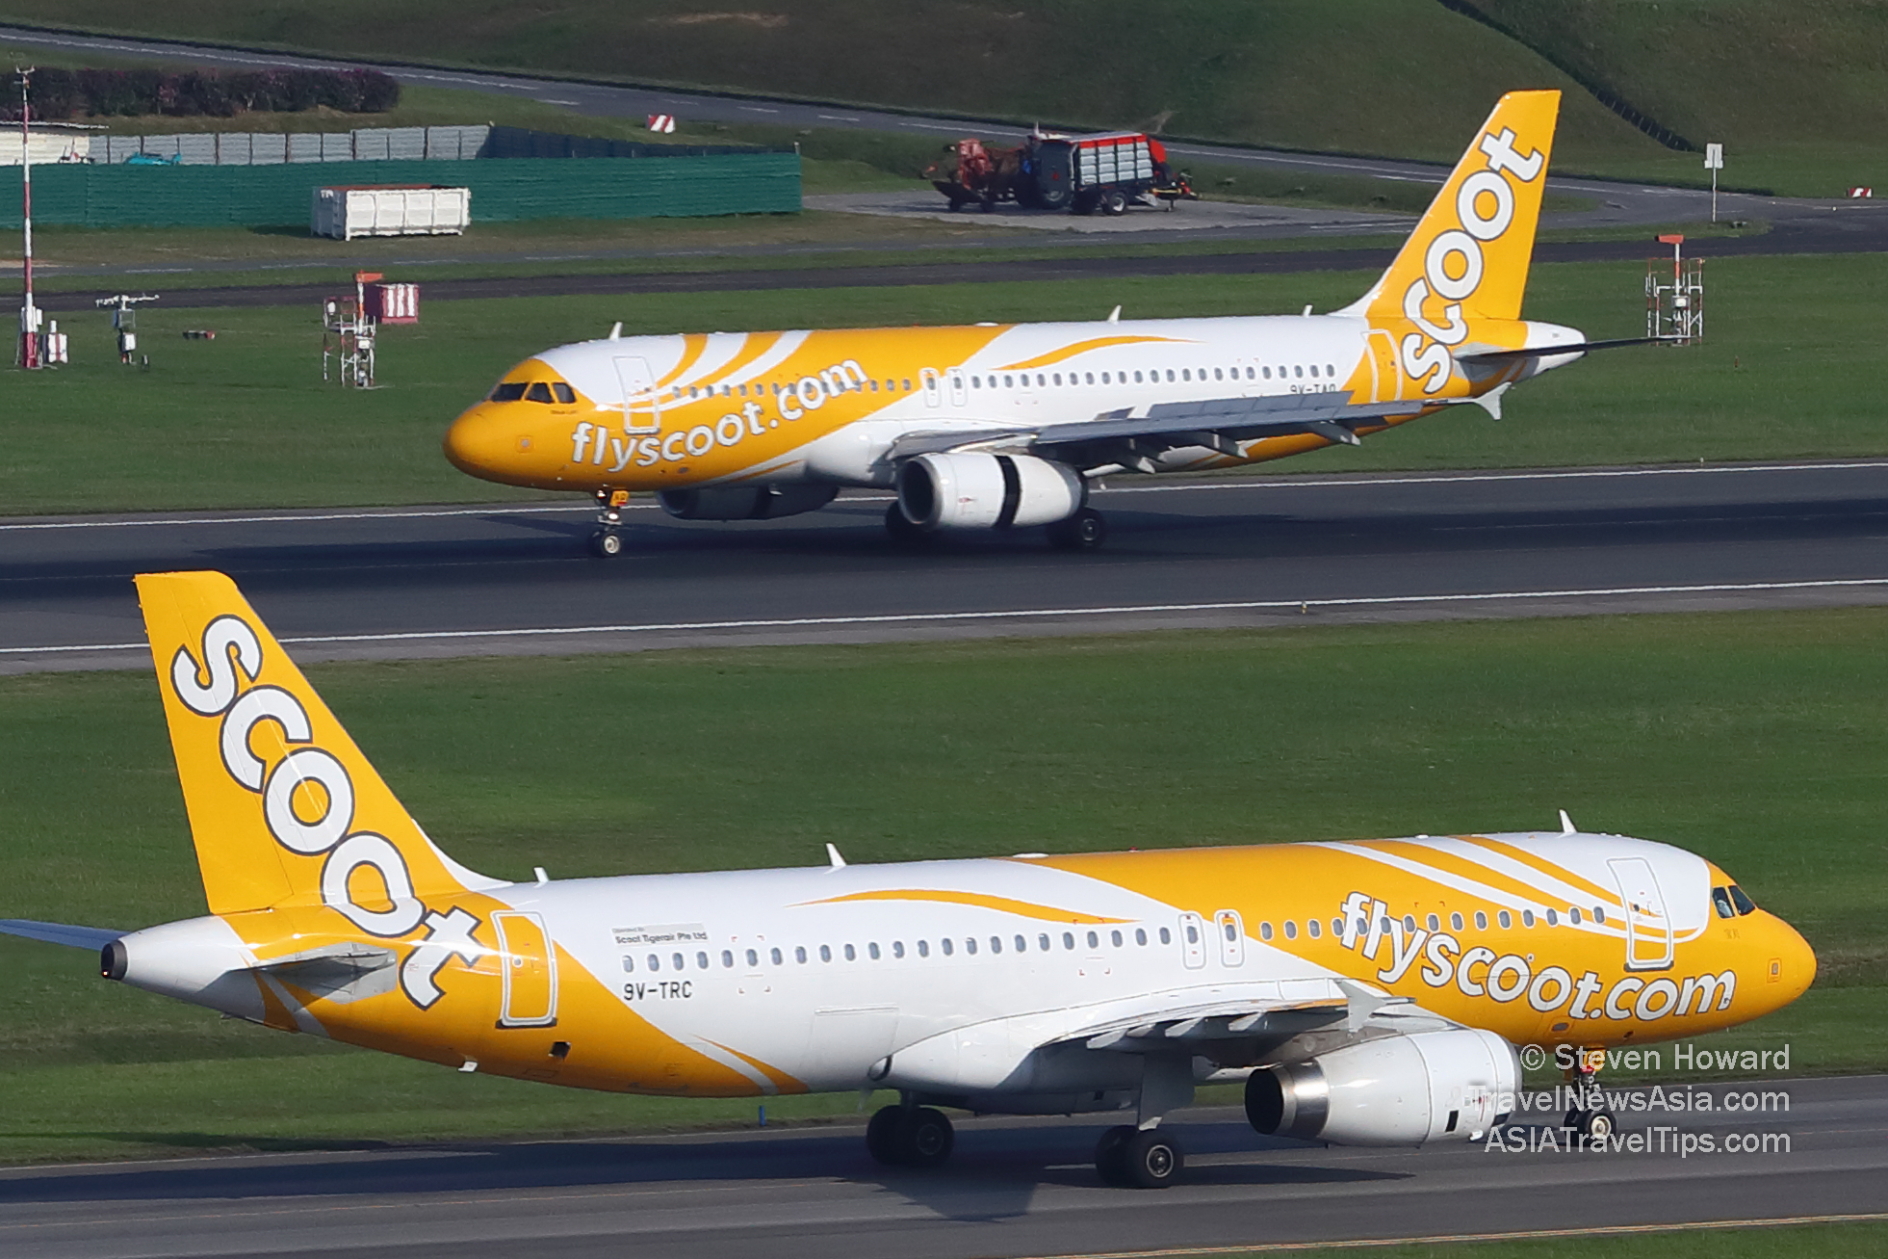 Two Scoot A320s at Changi. Picture by Steven Howard of TravelNewsAsia.com Click to enlarge.